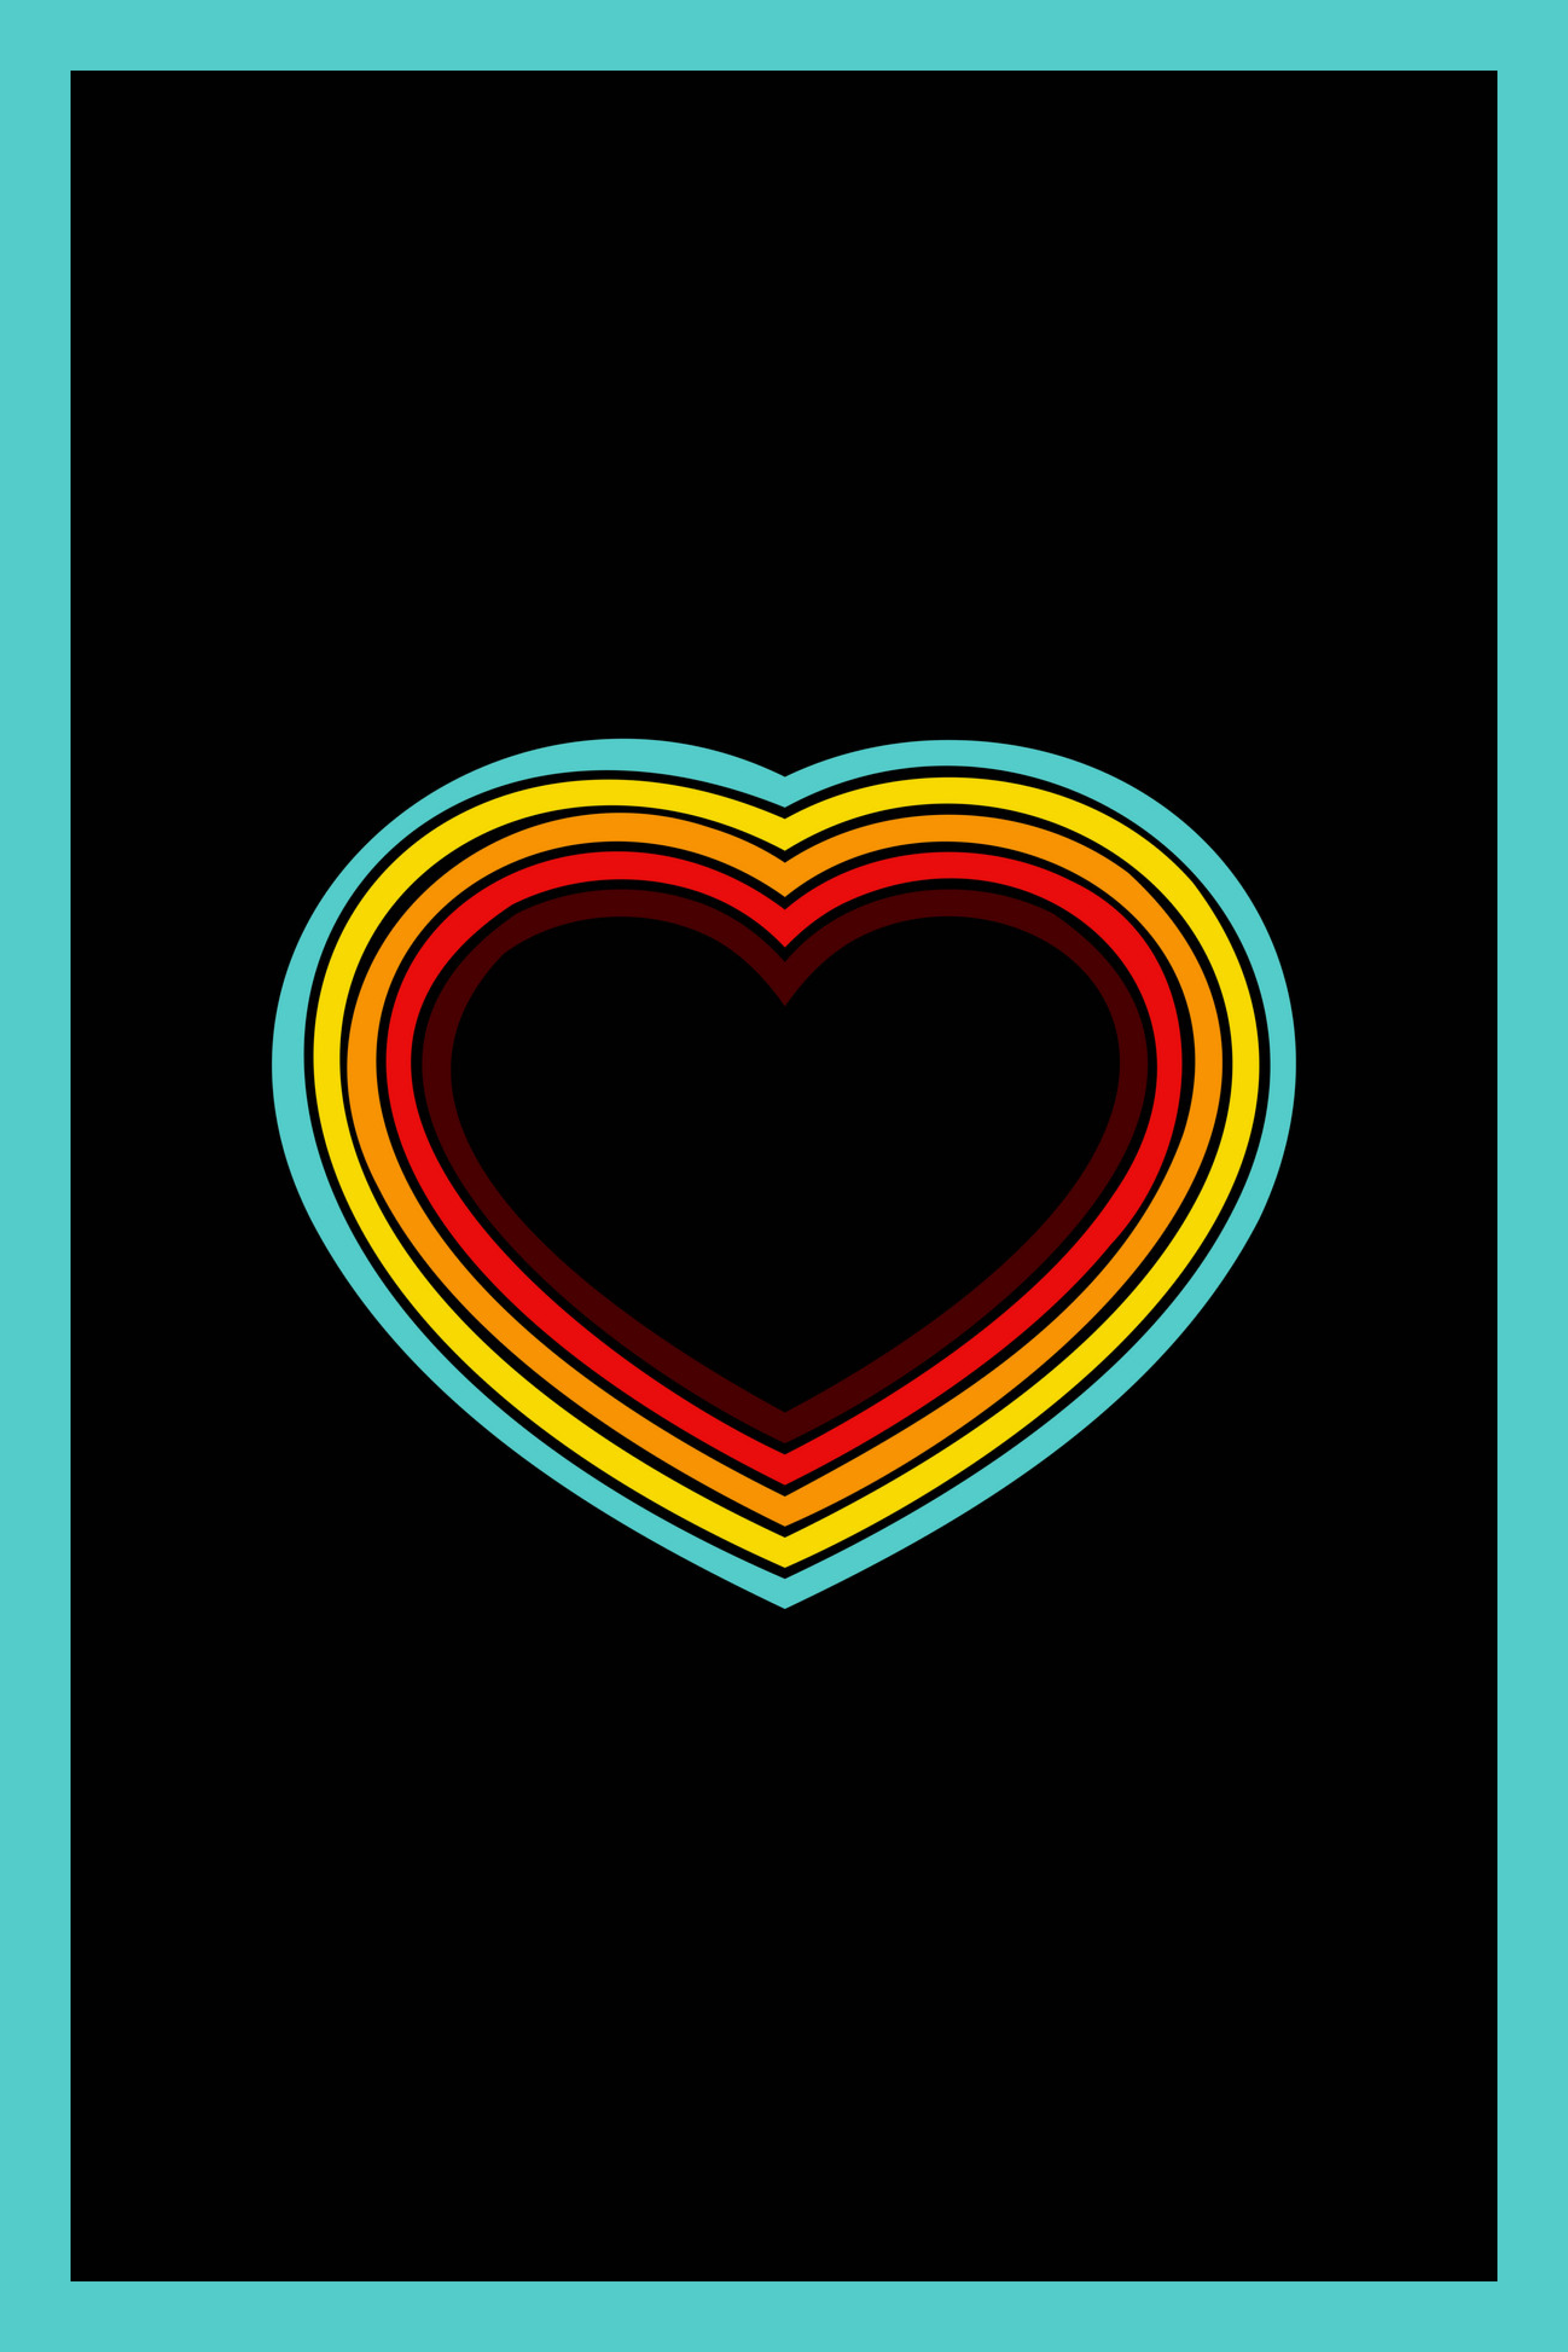 Heart made of colored stripes on a black background.